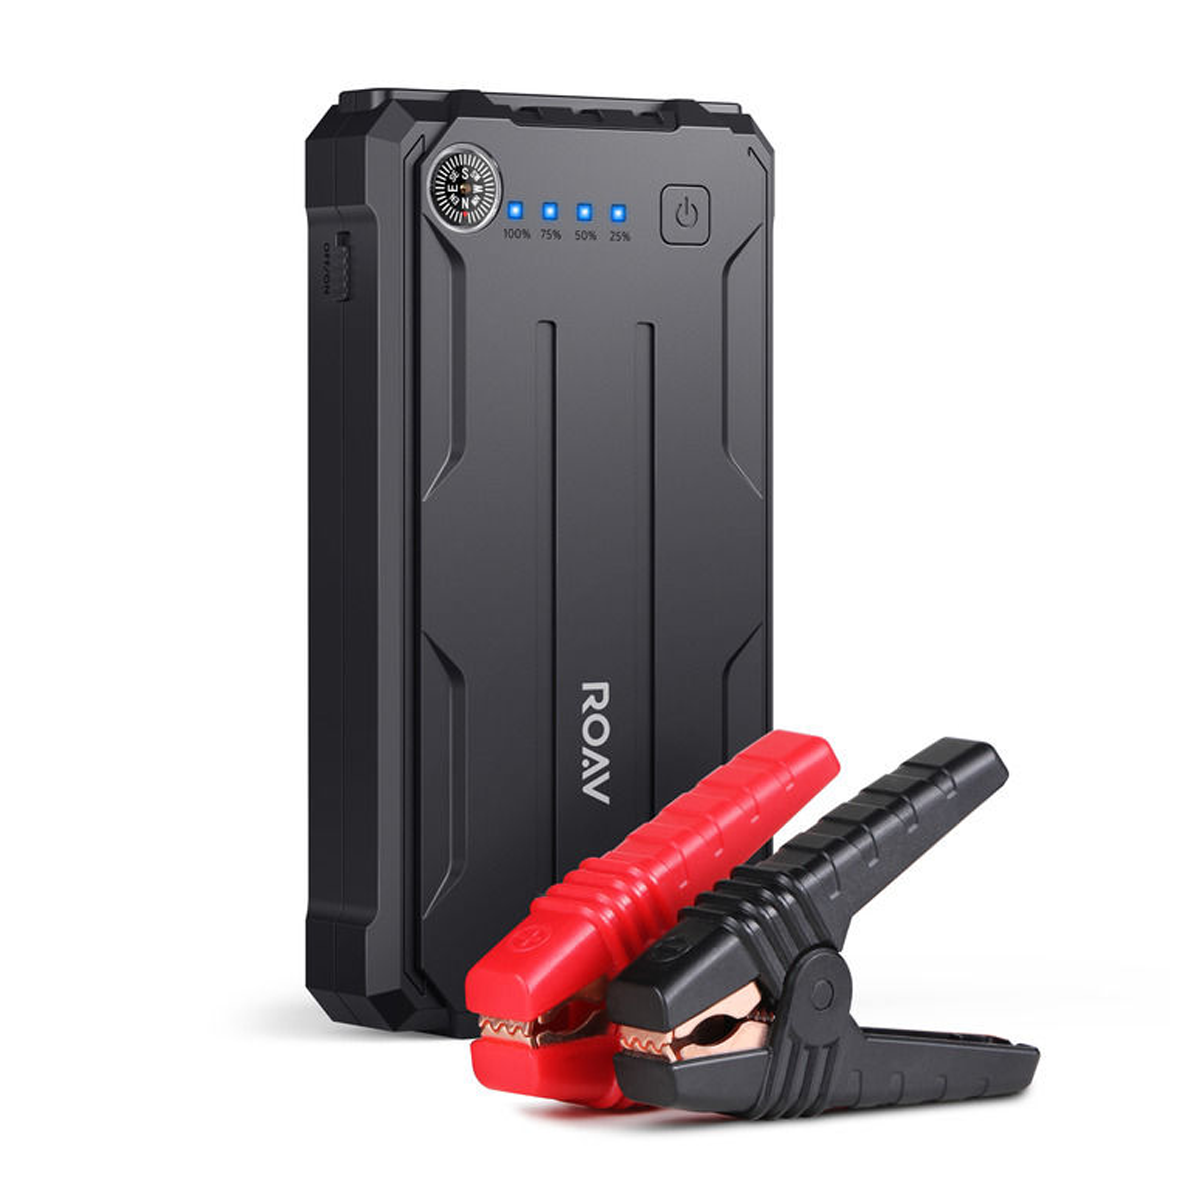 Roav Jump Starter Pro Emergency Portable Phone Charger with Safety Protection